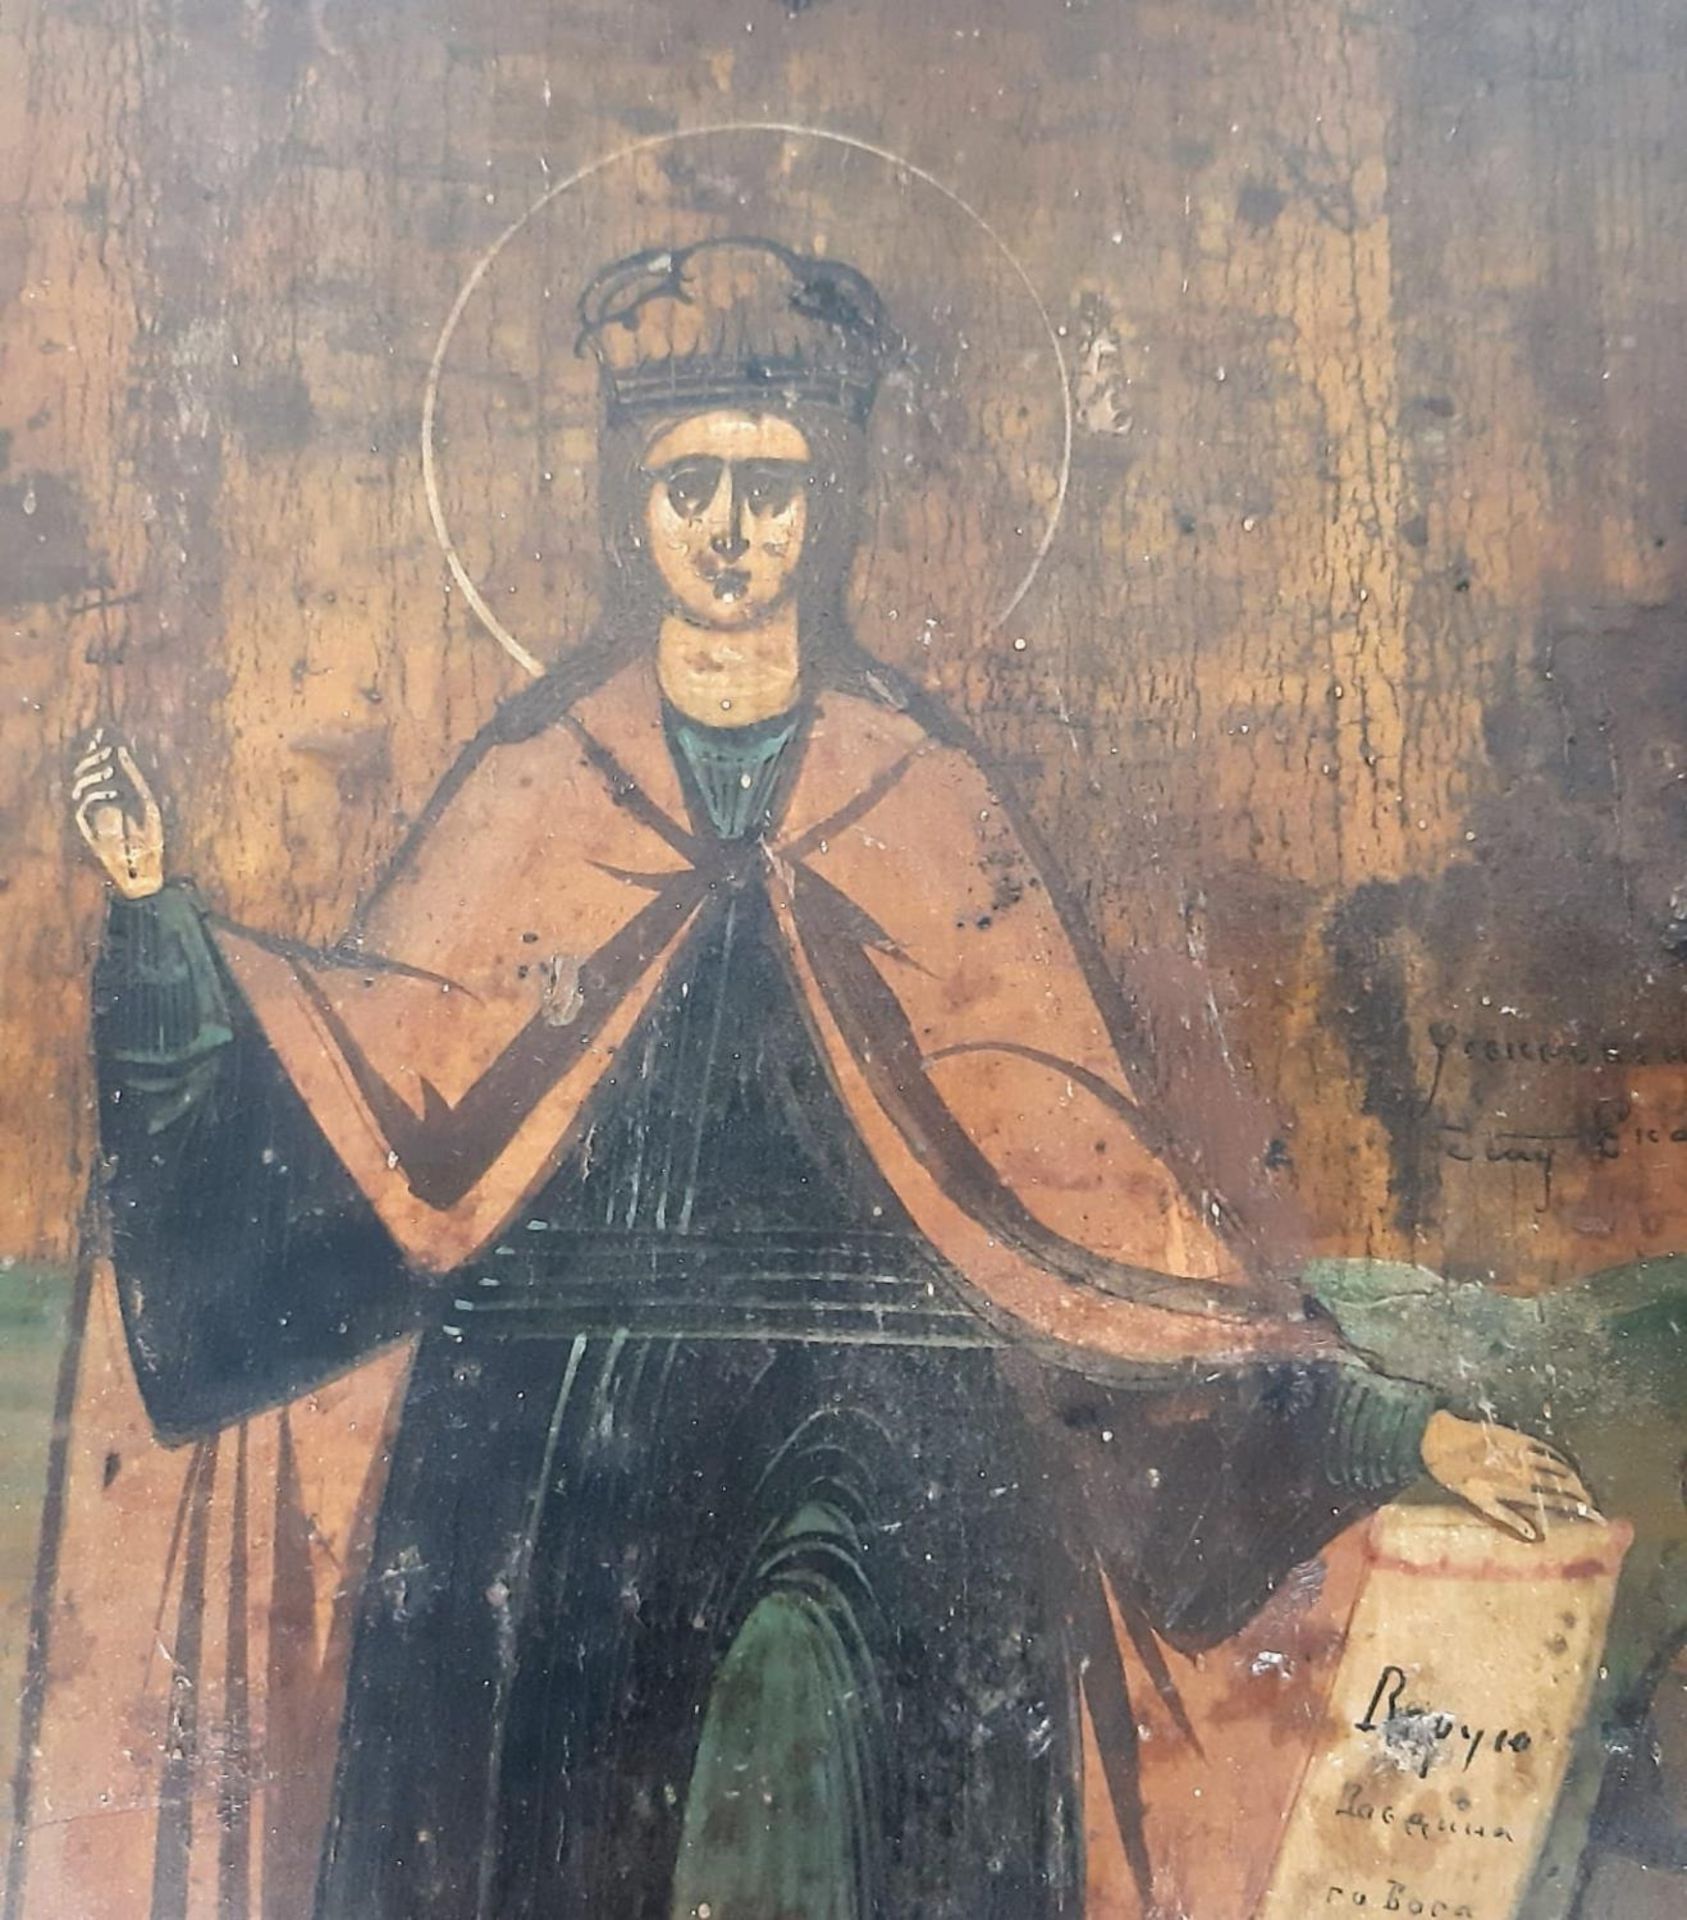 An Antique Icon of Saint Catherine of Alexandria and the Spiked Wheel - Oil on wood. Saint Catherine - Image 3 of 4